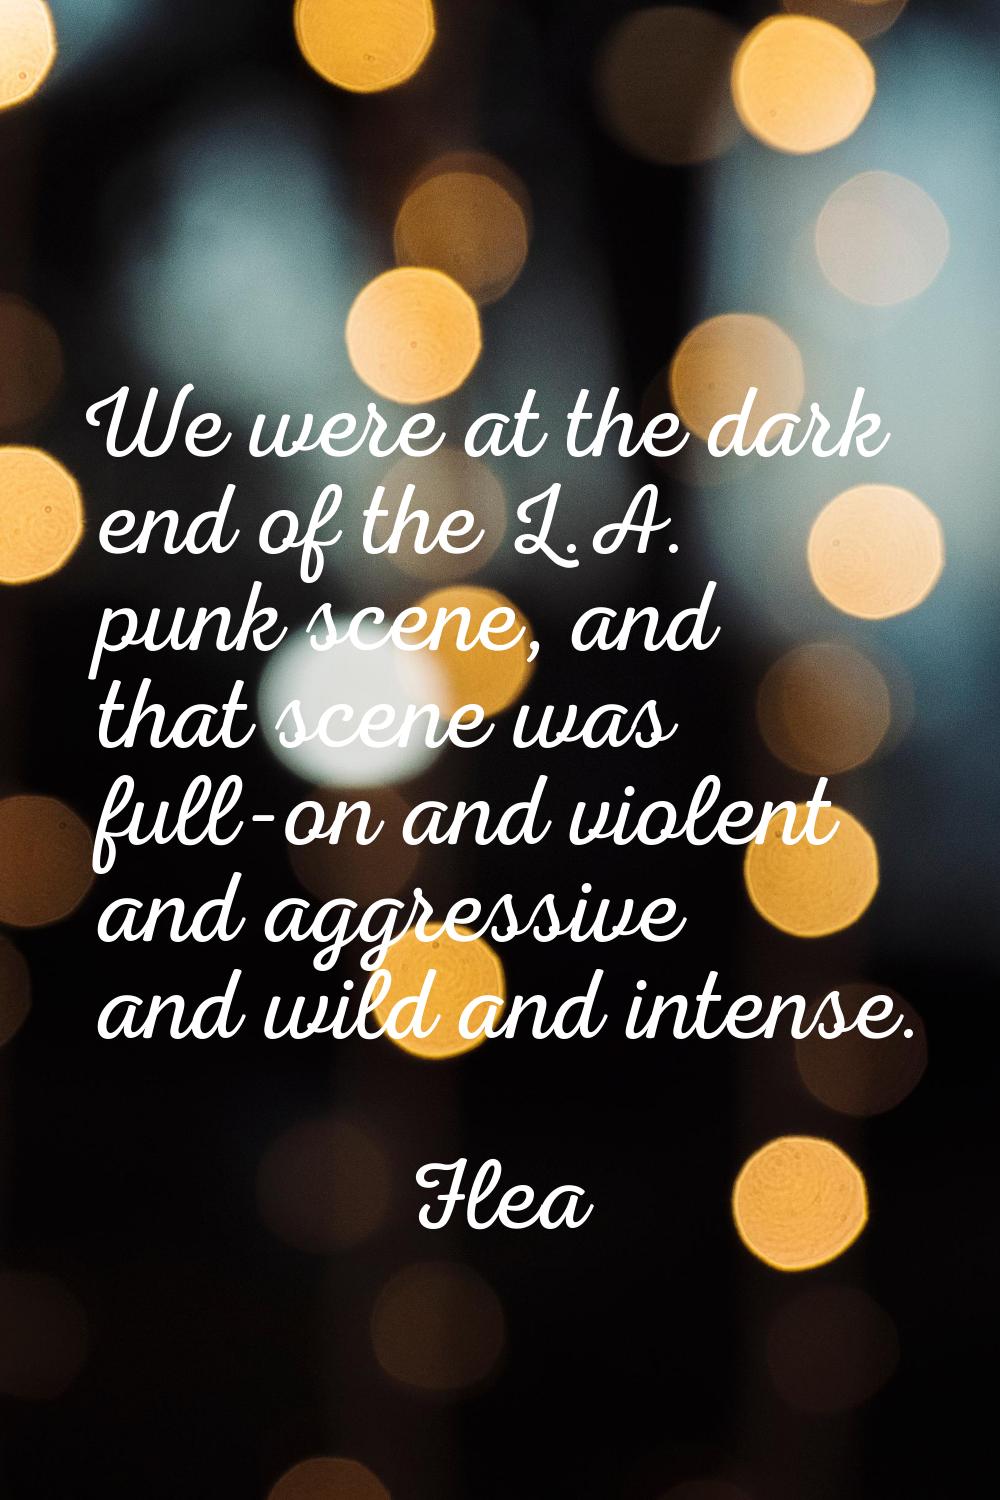 We were at the dark end of the L.A. punk scene, and that scene was full-on and violent and aggressi